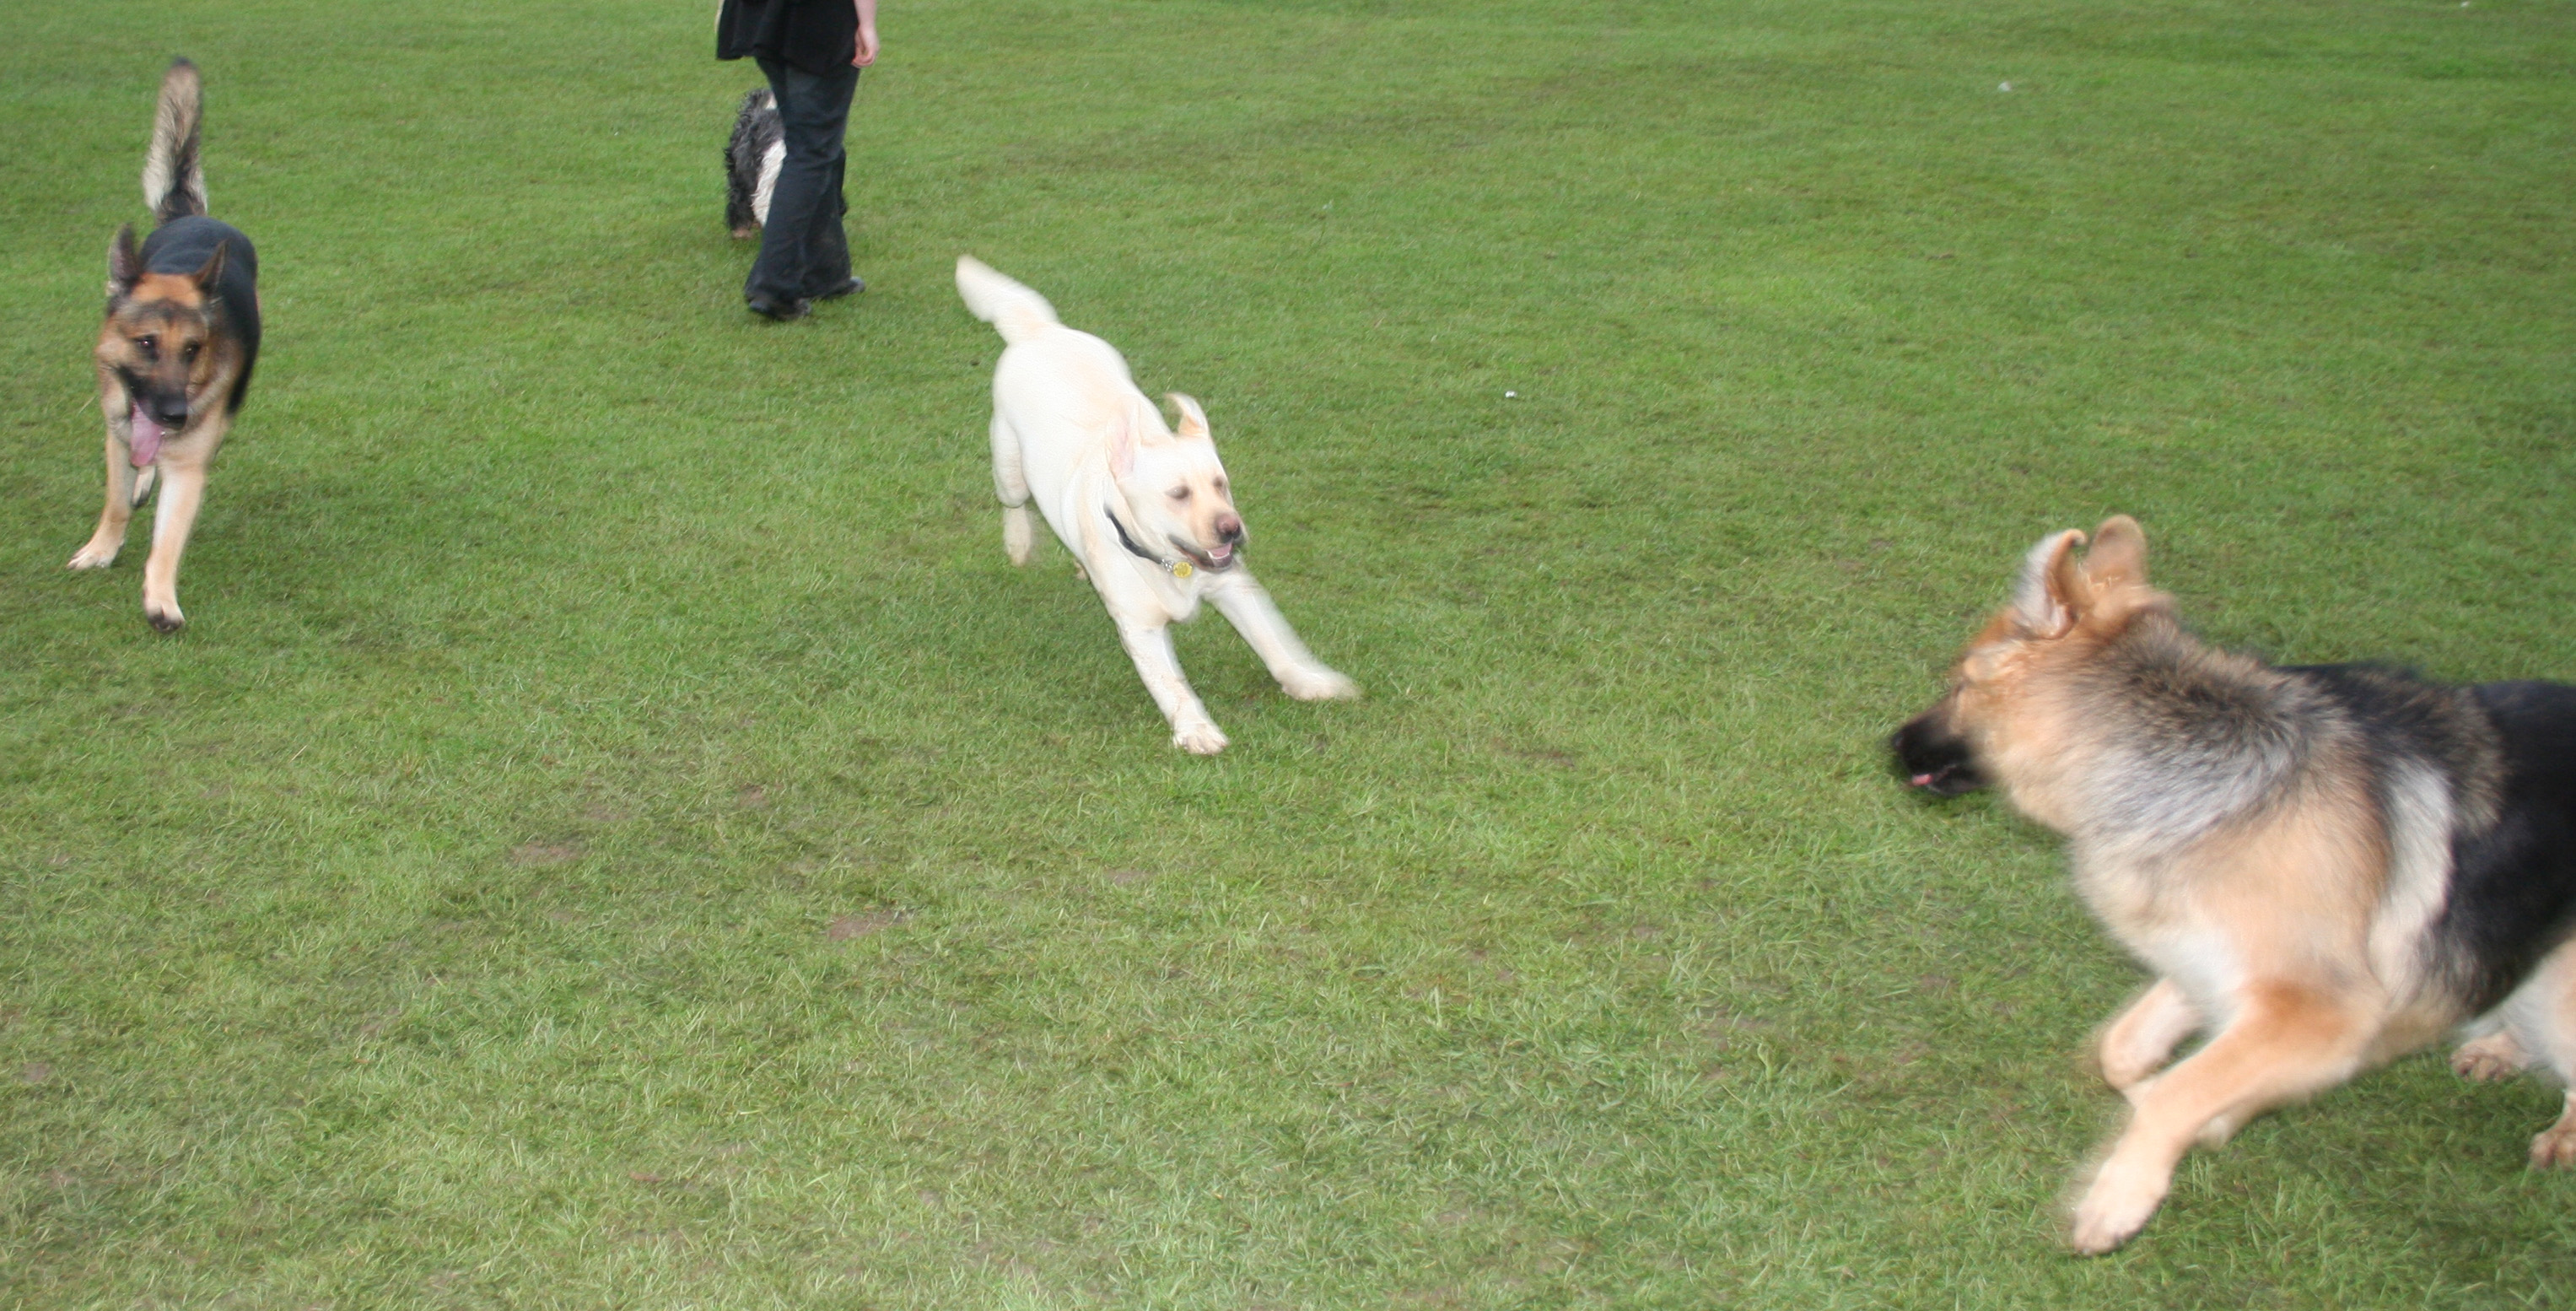 3 large dogs playing